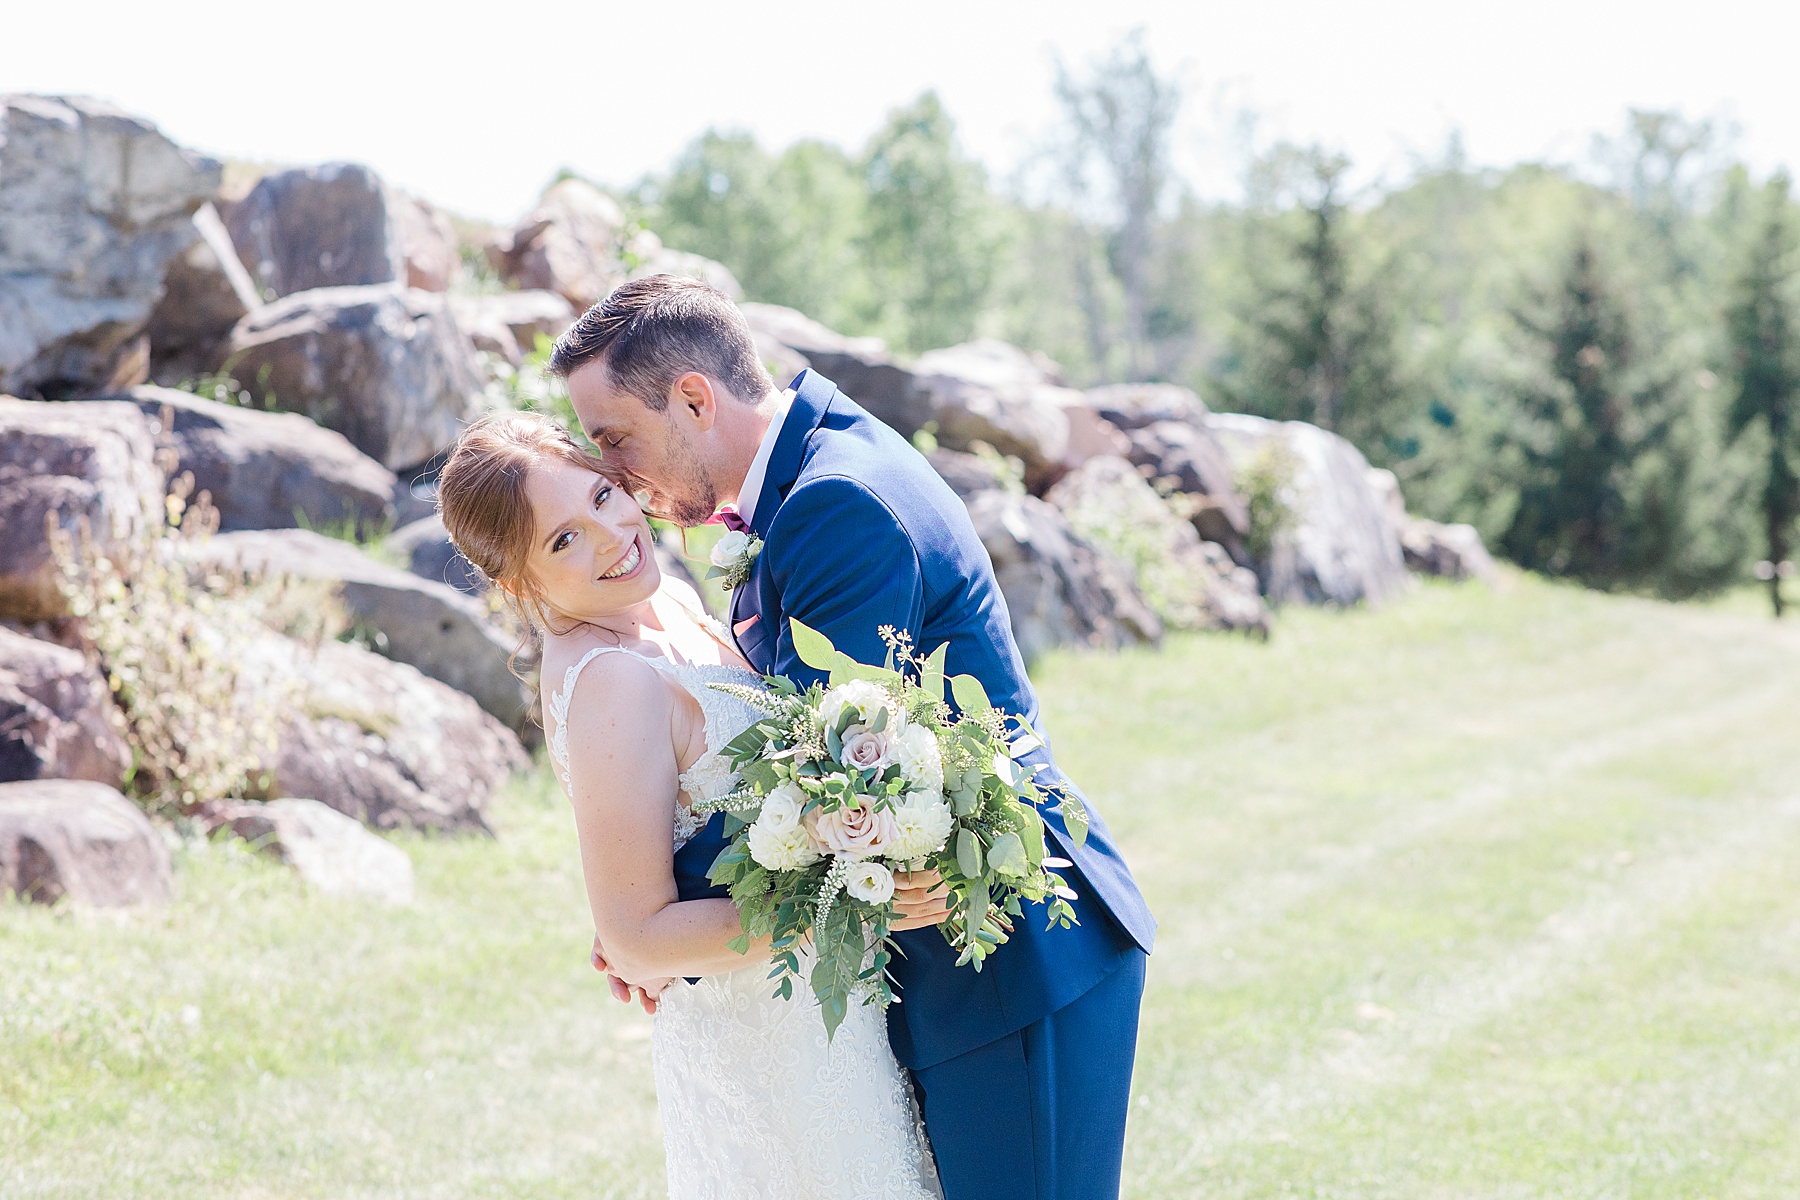 bride and groom portrait at timber run golf course wedding in Lanark, Ontario photographed by Brittany Navin